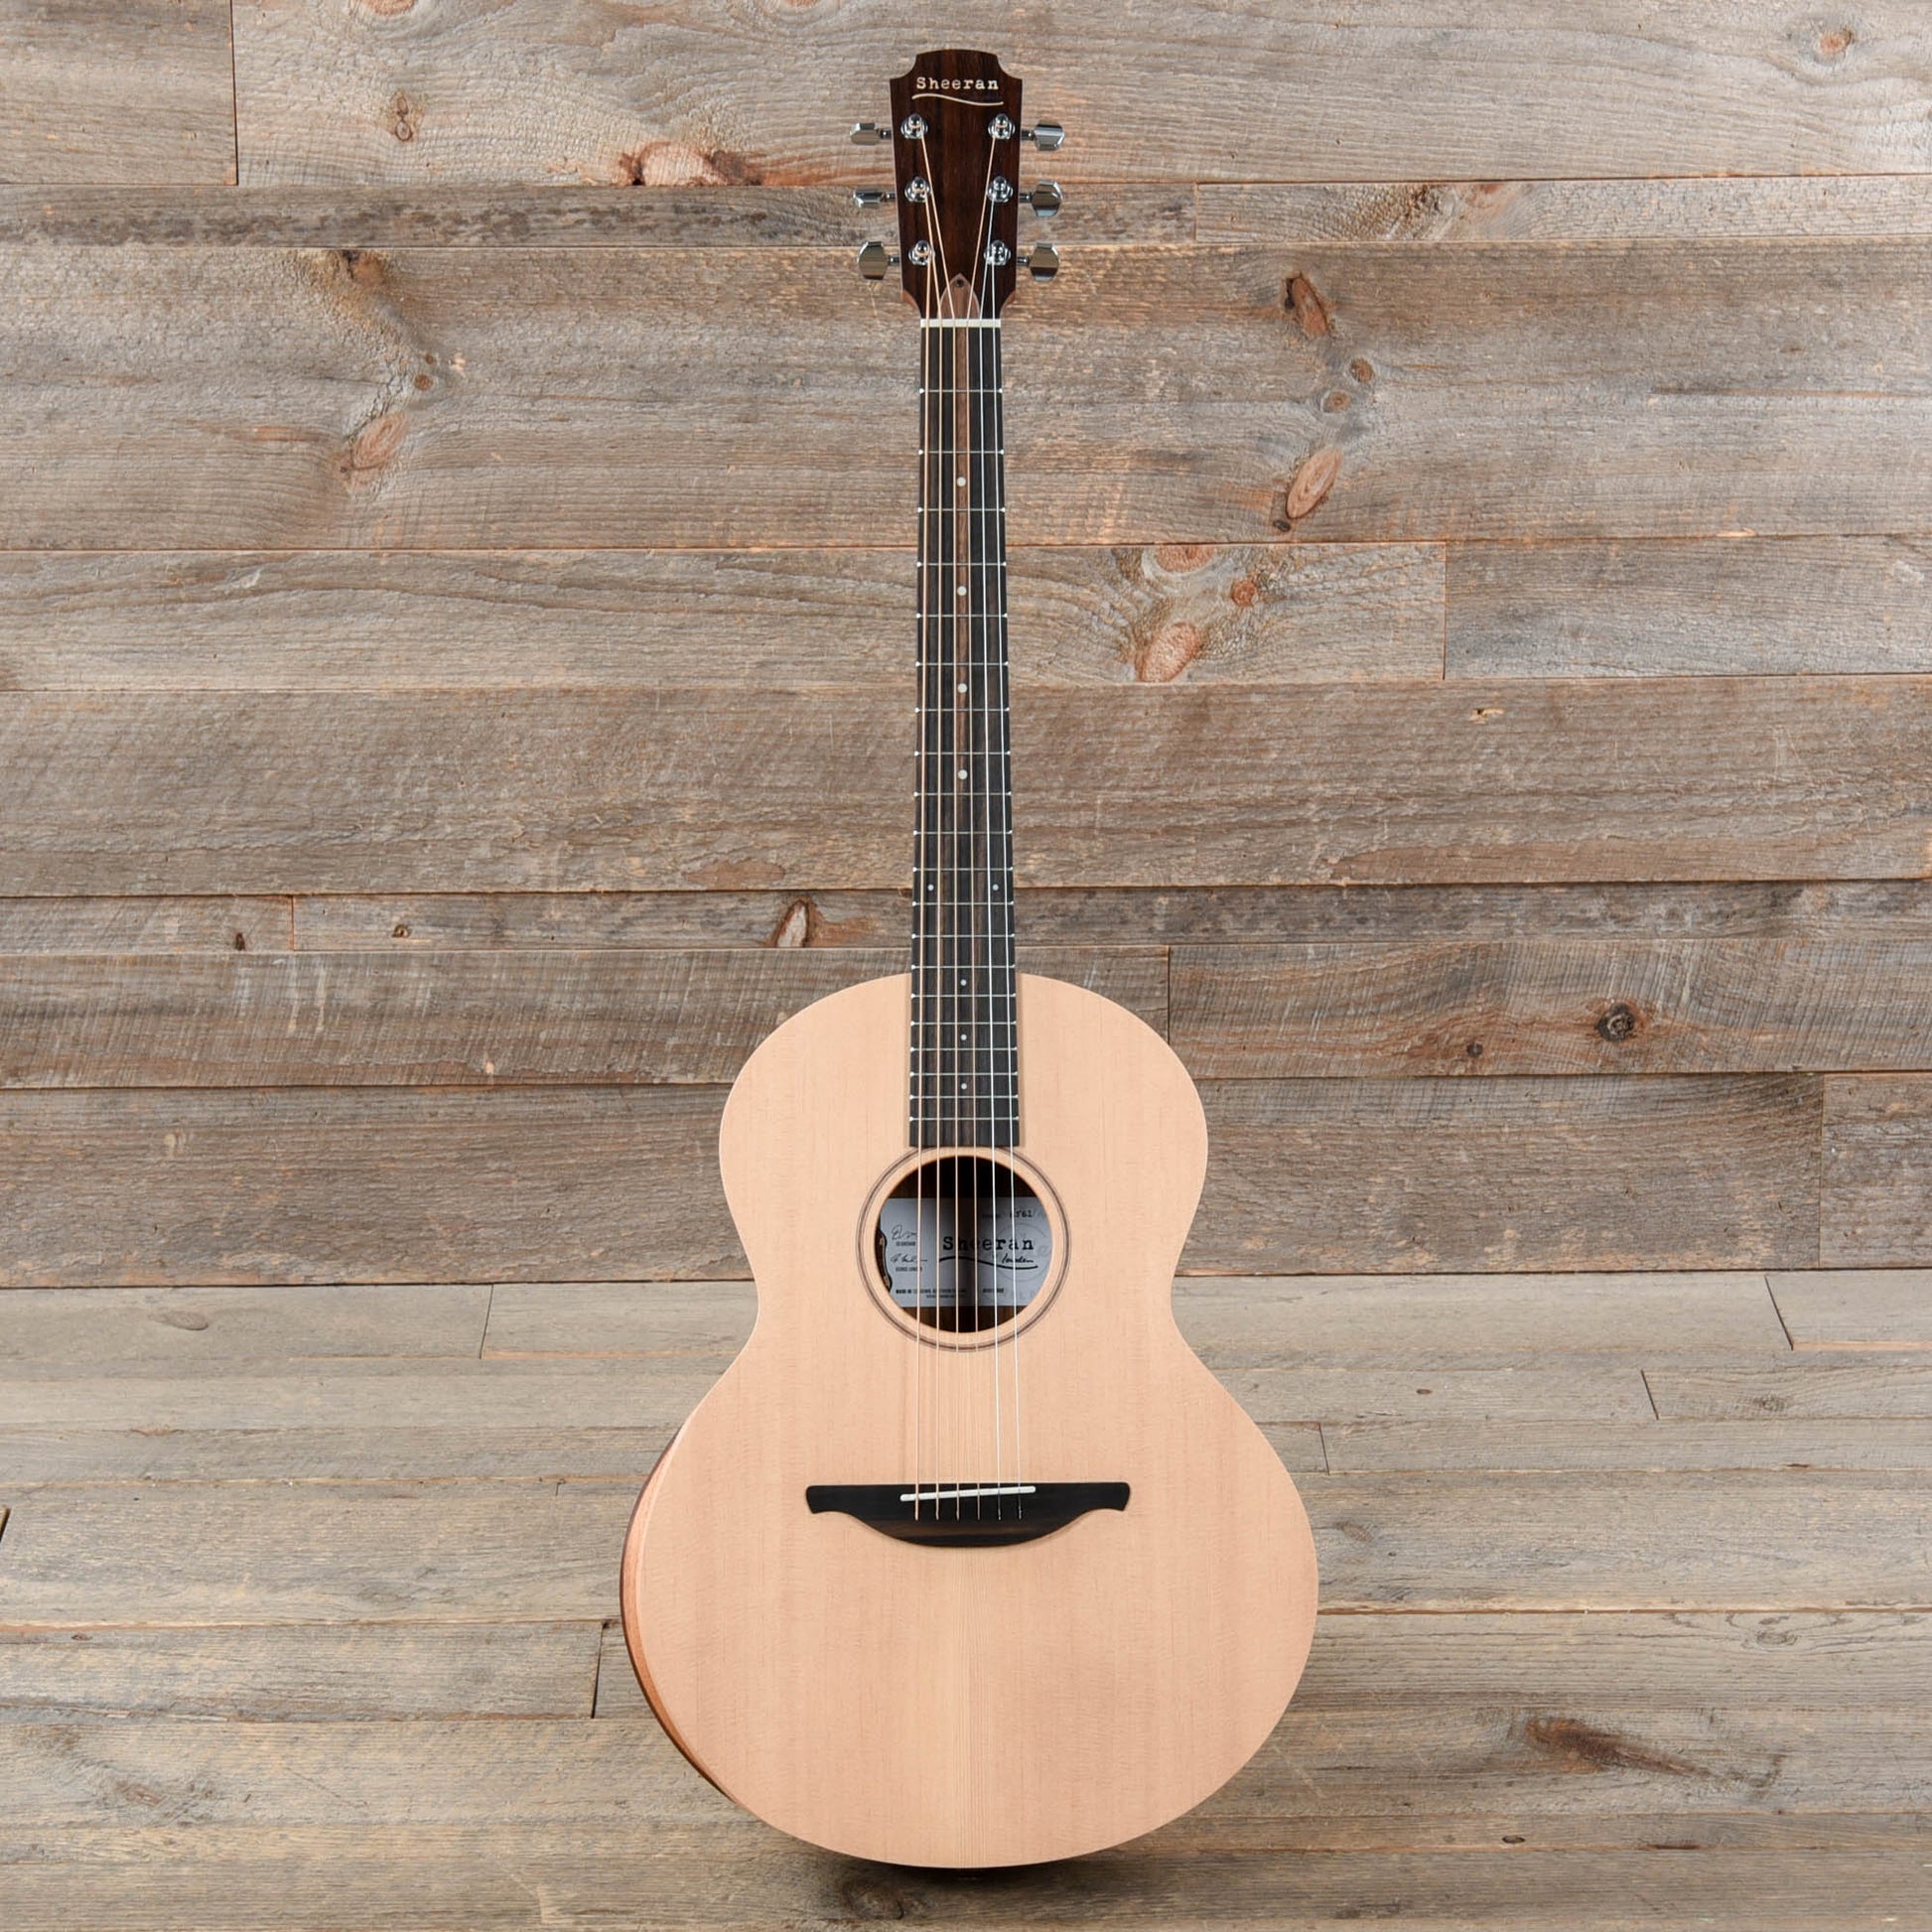 Sheeran by Lowden S02 Sitka Spruce/Indian Rosewood w/Top Bevel & LR Baggs Element VTC Acoustic Guitars / Mini/Travel